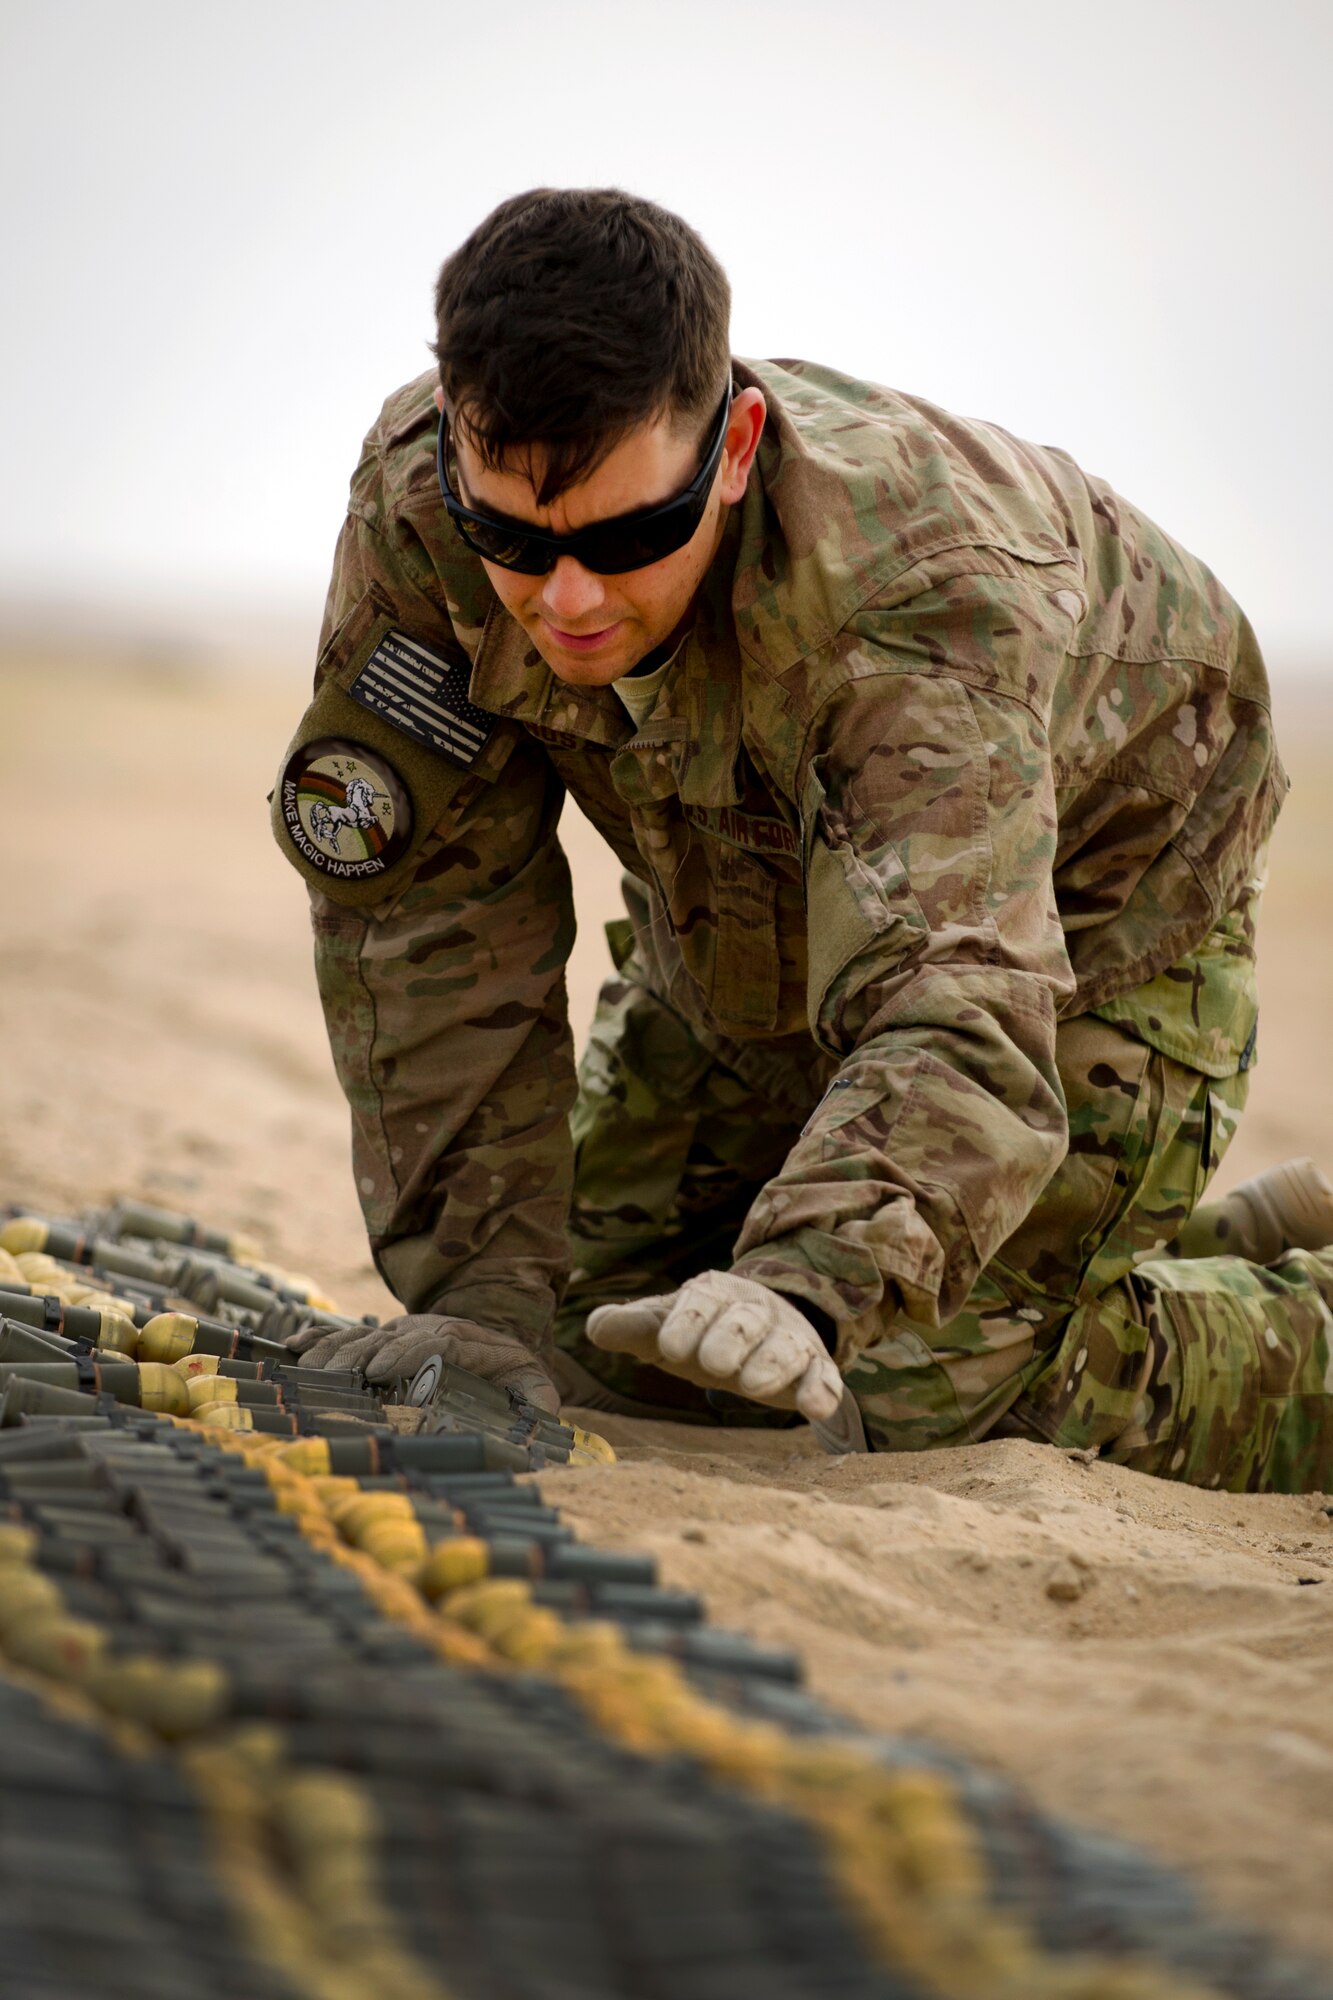 Staff Sgt. Paul Orosz, an explosive ordnance disposal technician, carefully arranges munitions slated for disposal at an undisclosed location in Southwest Asia.  Orosz is deployed to the 386th Expeditionary Civil Engineer Squadron from the 52nd CES at Spangdahlem Air Base, Germany. (U.S. Air Force photo by Senior Master Sgt. Burke Baker)(This image was manipulated for security purposes)    